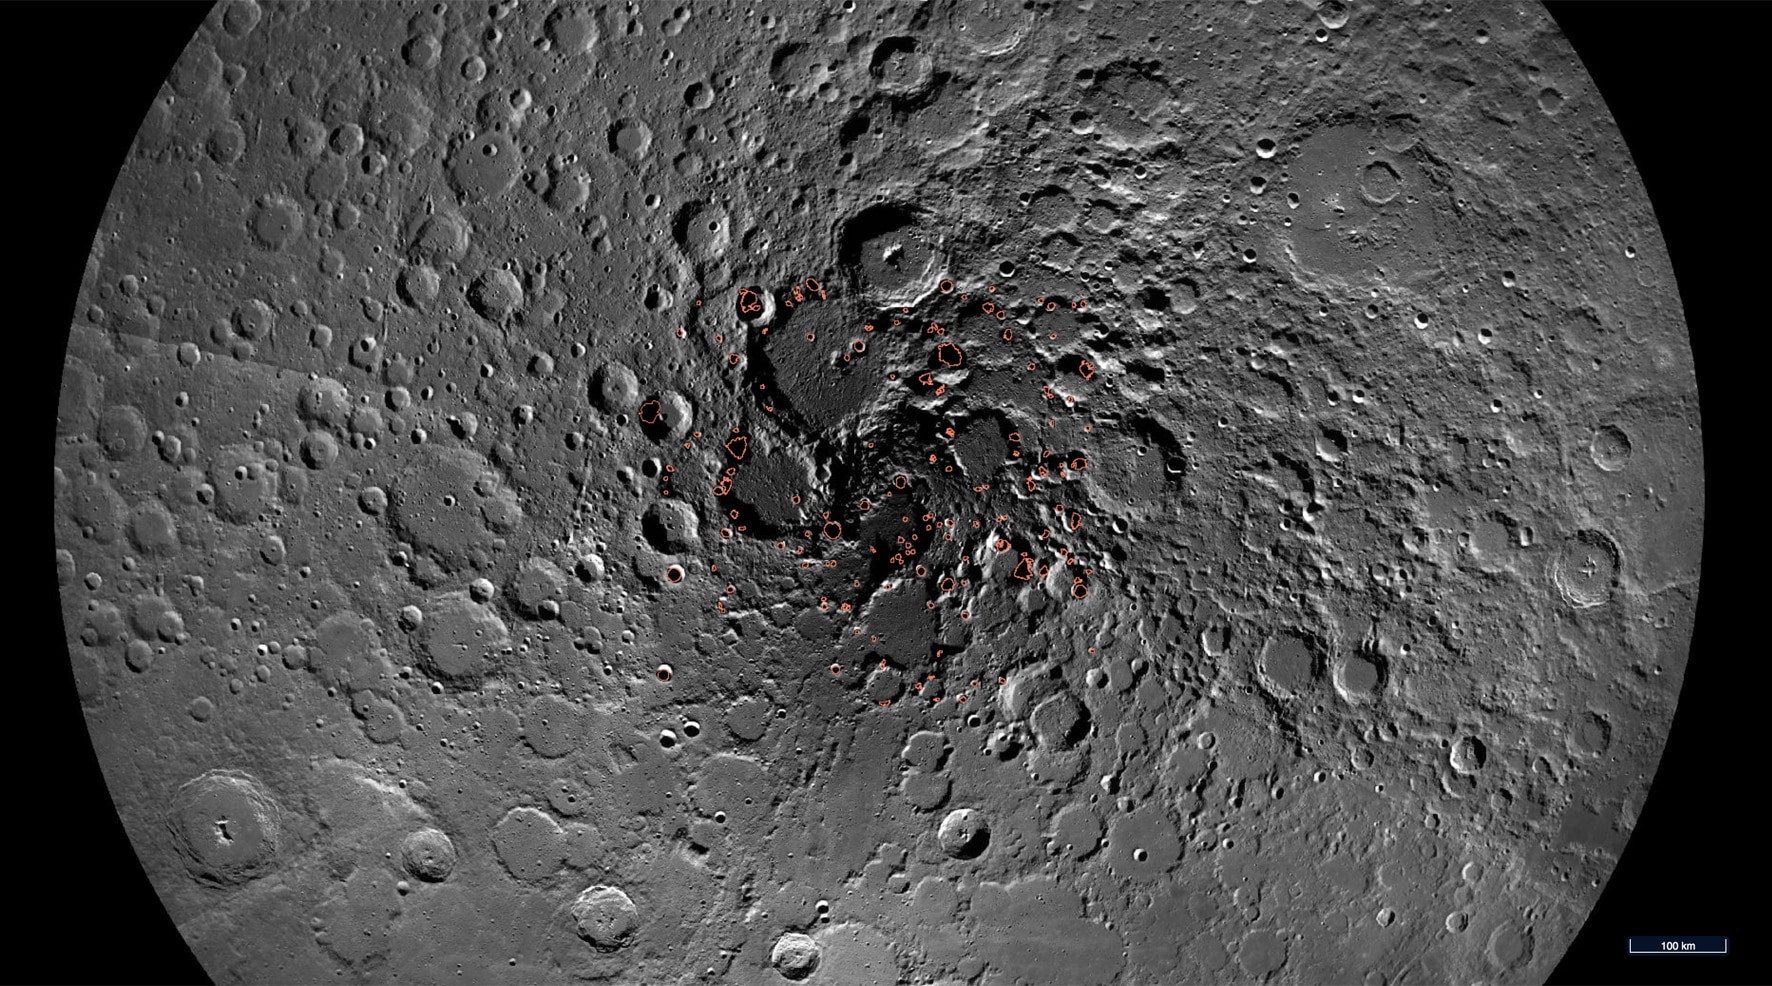 A map of the Moon's north pole showing areas where ice may lie. Credit: NASA/GSFC/Arizona State University